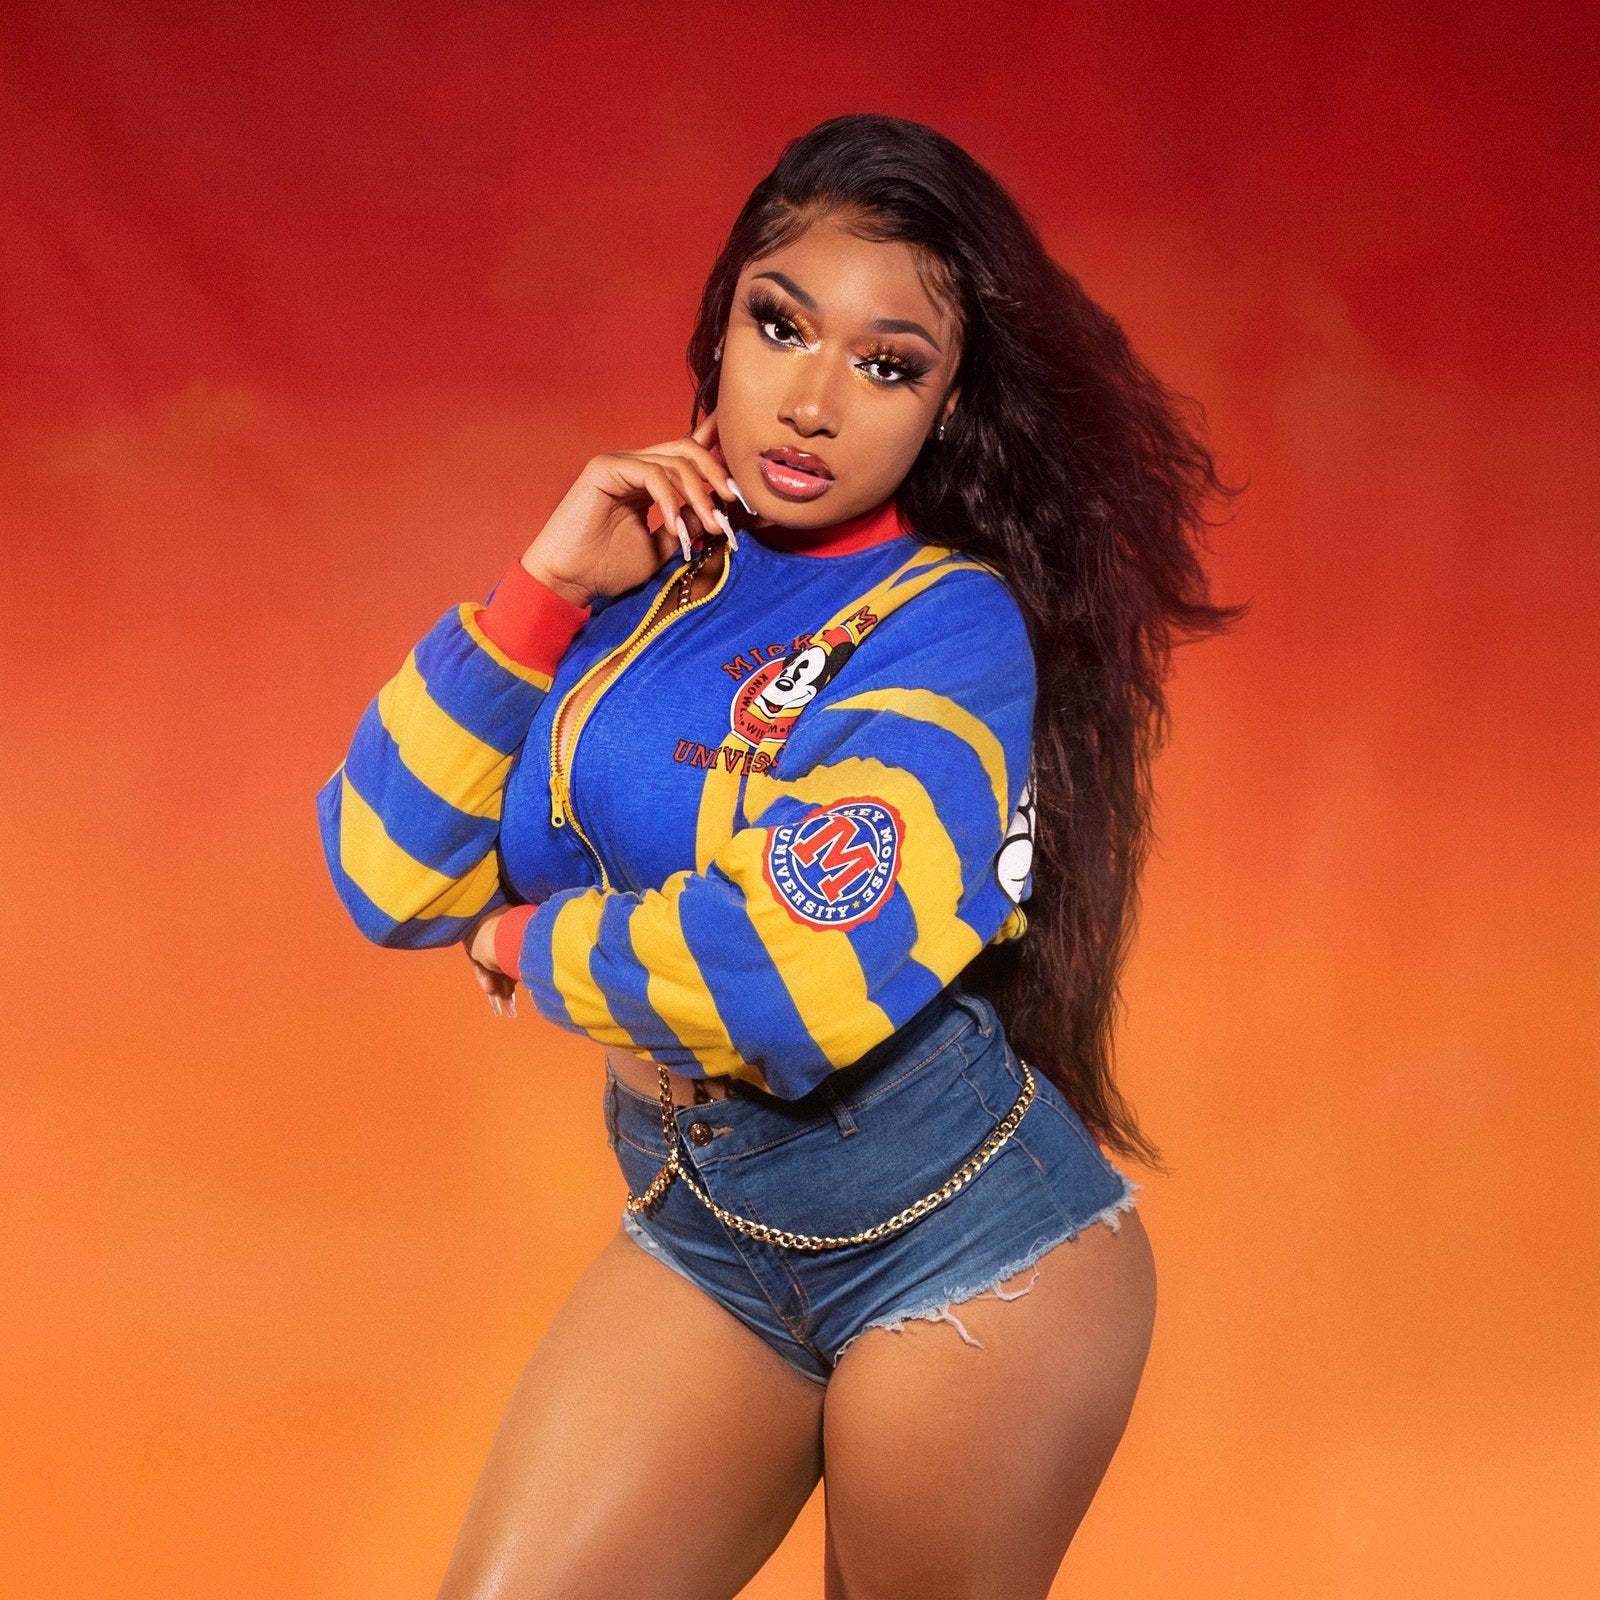 Megan Thee Stallion Partners With Depop To Sell A Few Items From Her Wardrobe